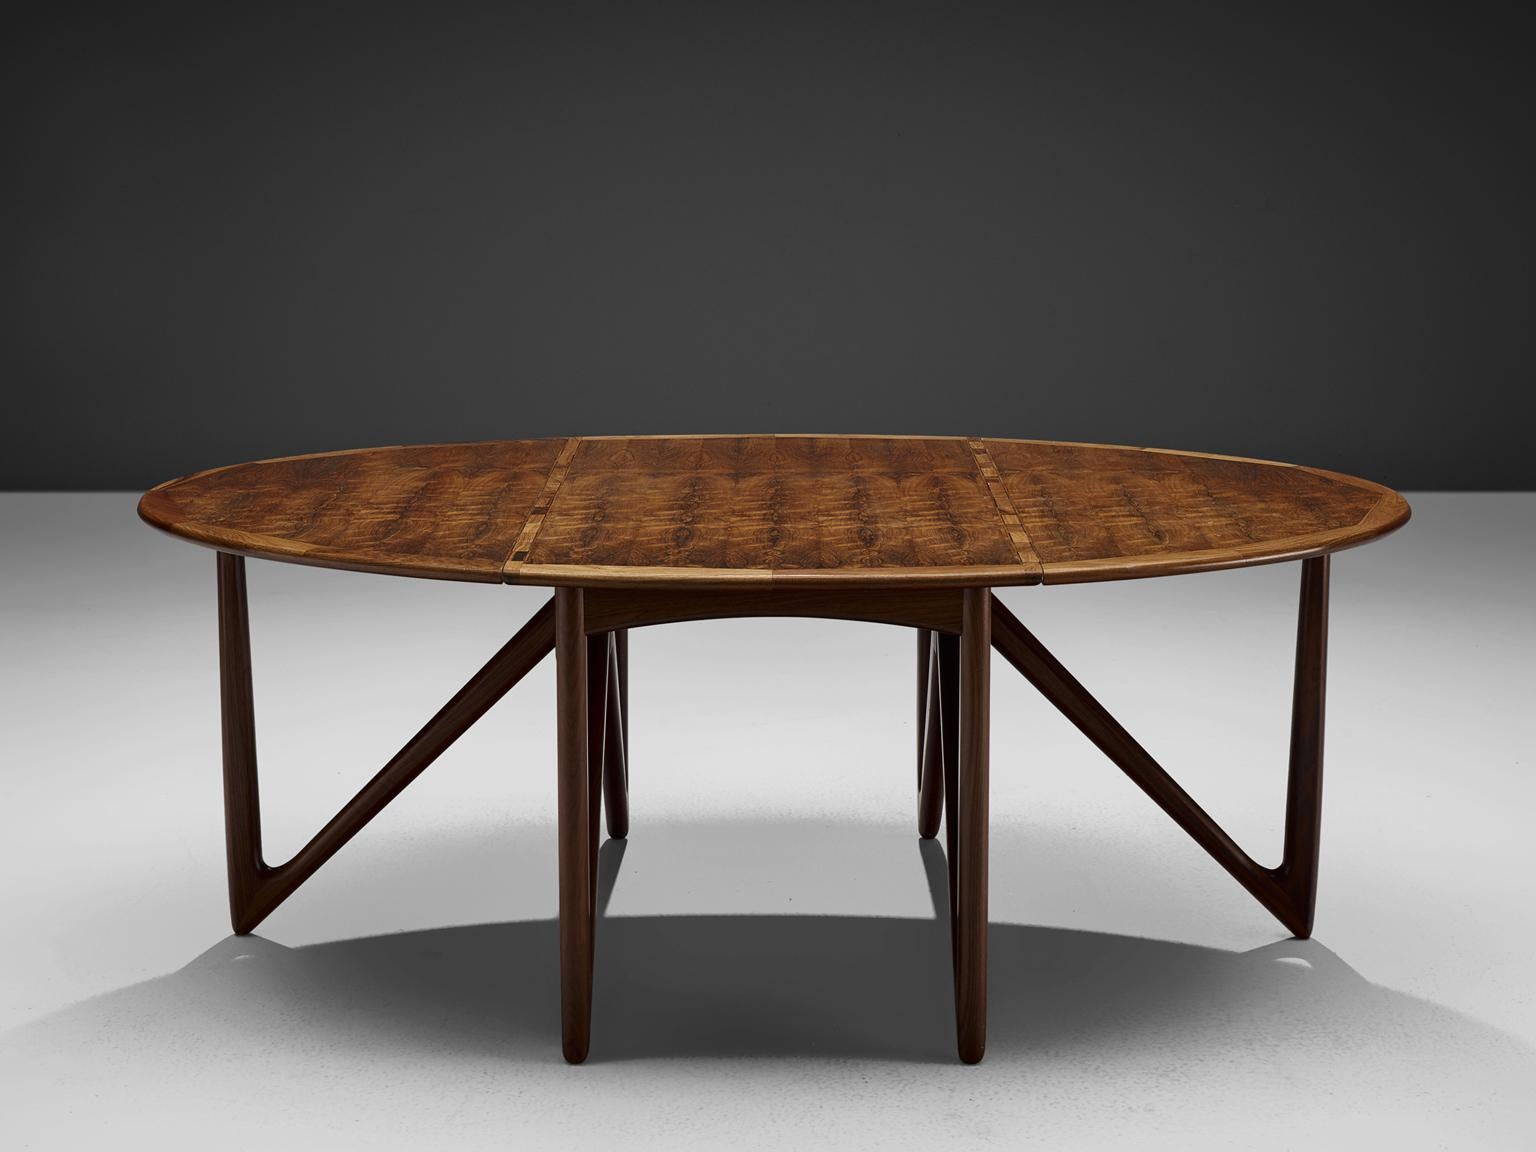 Kurt Ostervig for Jason Mobler Danish modern, oval table in rosewood, Denmark 1960s.

This rare drop-leaf table shows an unusual, impressive base of six V-shaped legs, made with extraordinary craftsmanship. The clear shape of the oval top nicely